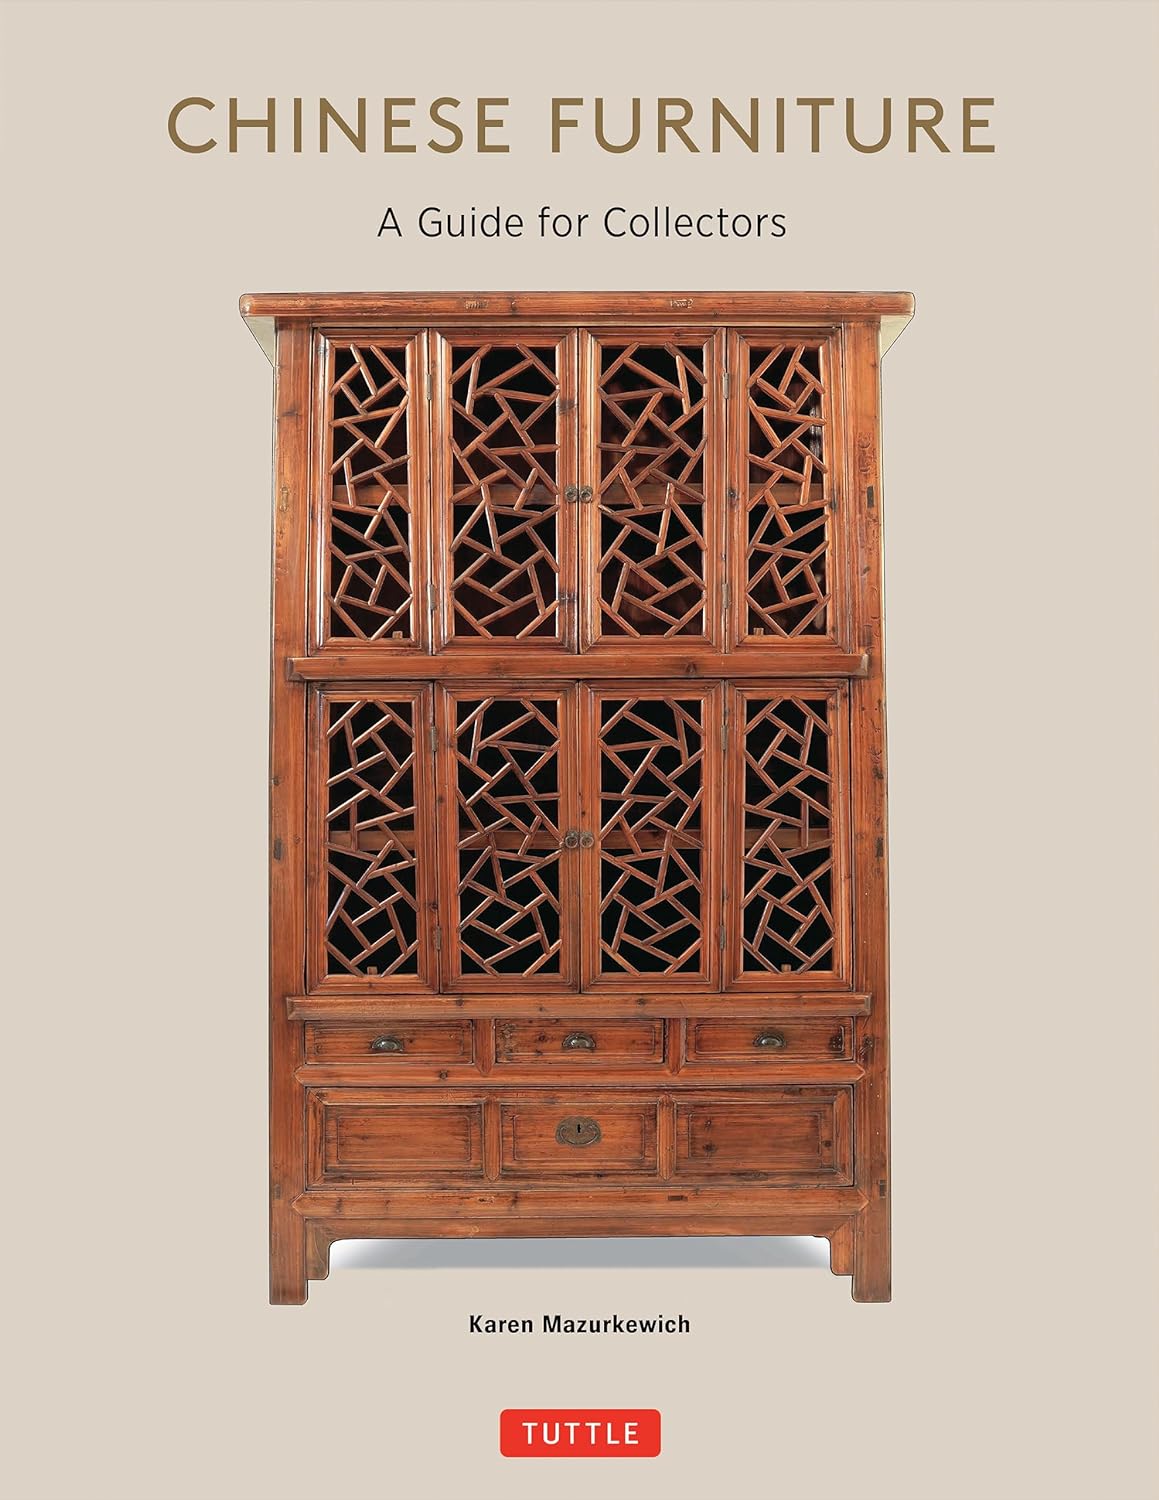 Chinese Furniture: A Guide to Collecting Antiques - MPHOnline.com